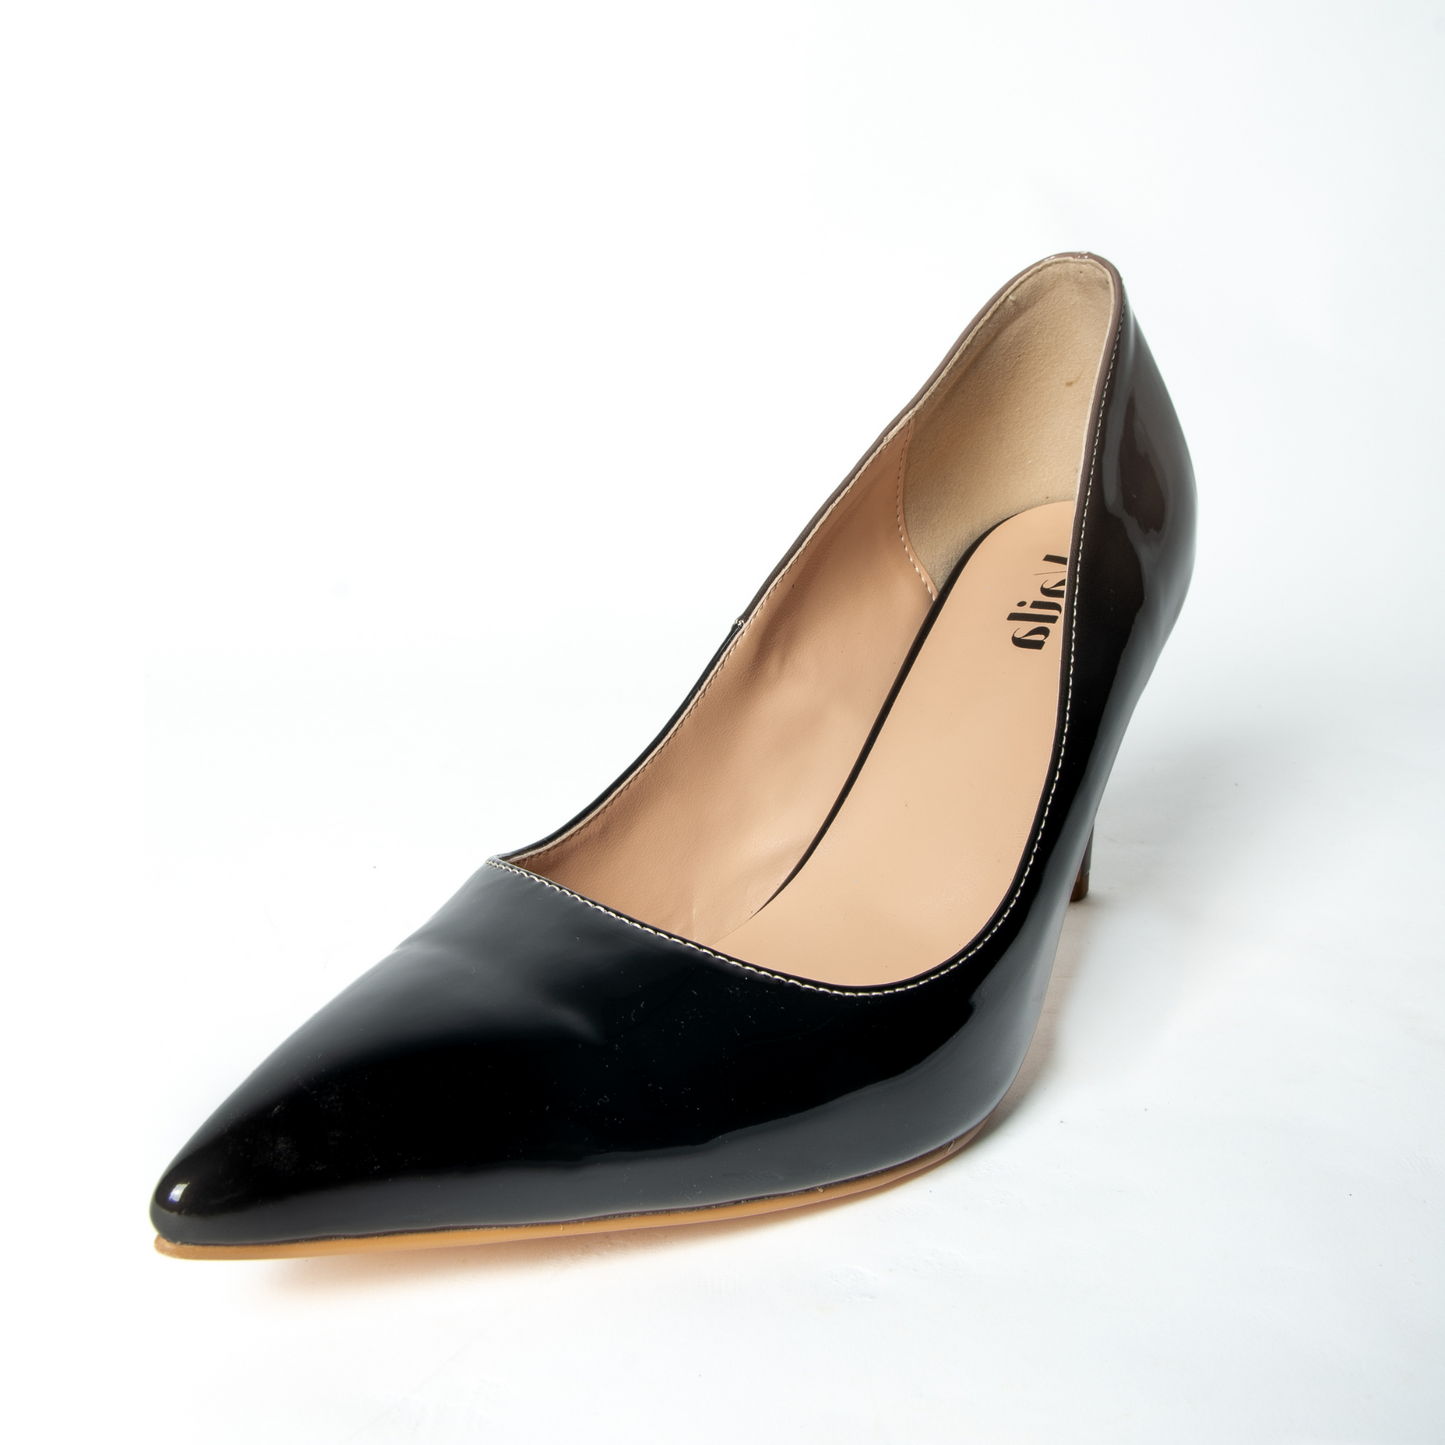 Raven Pump in Glossed Patent Leather perfect for office outfits